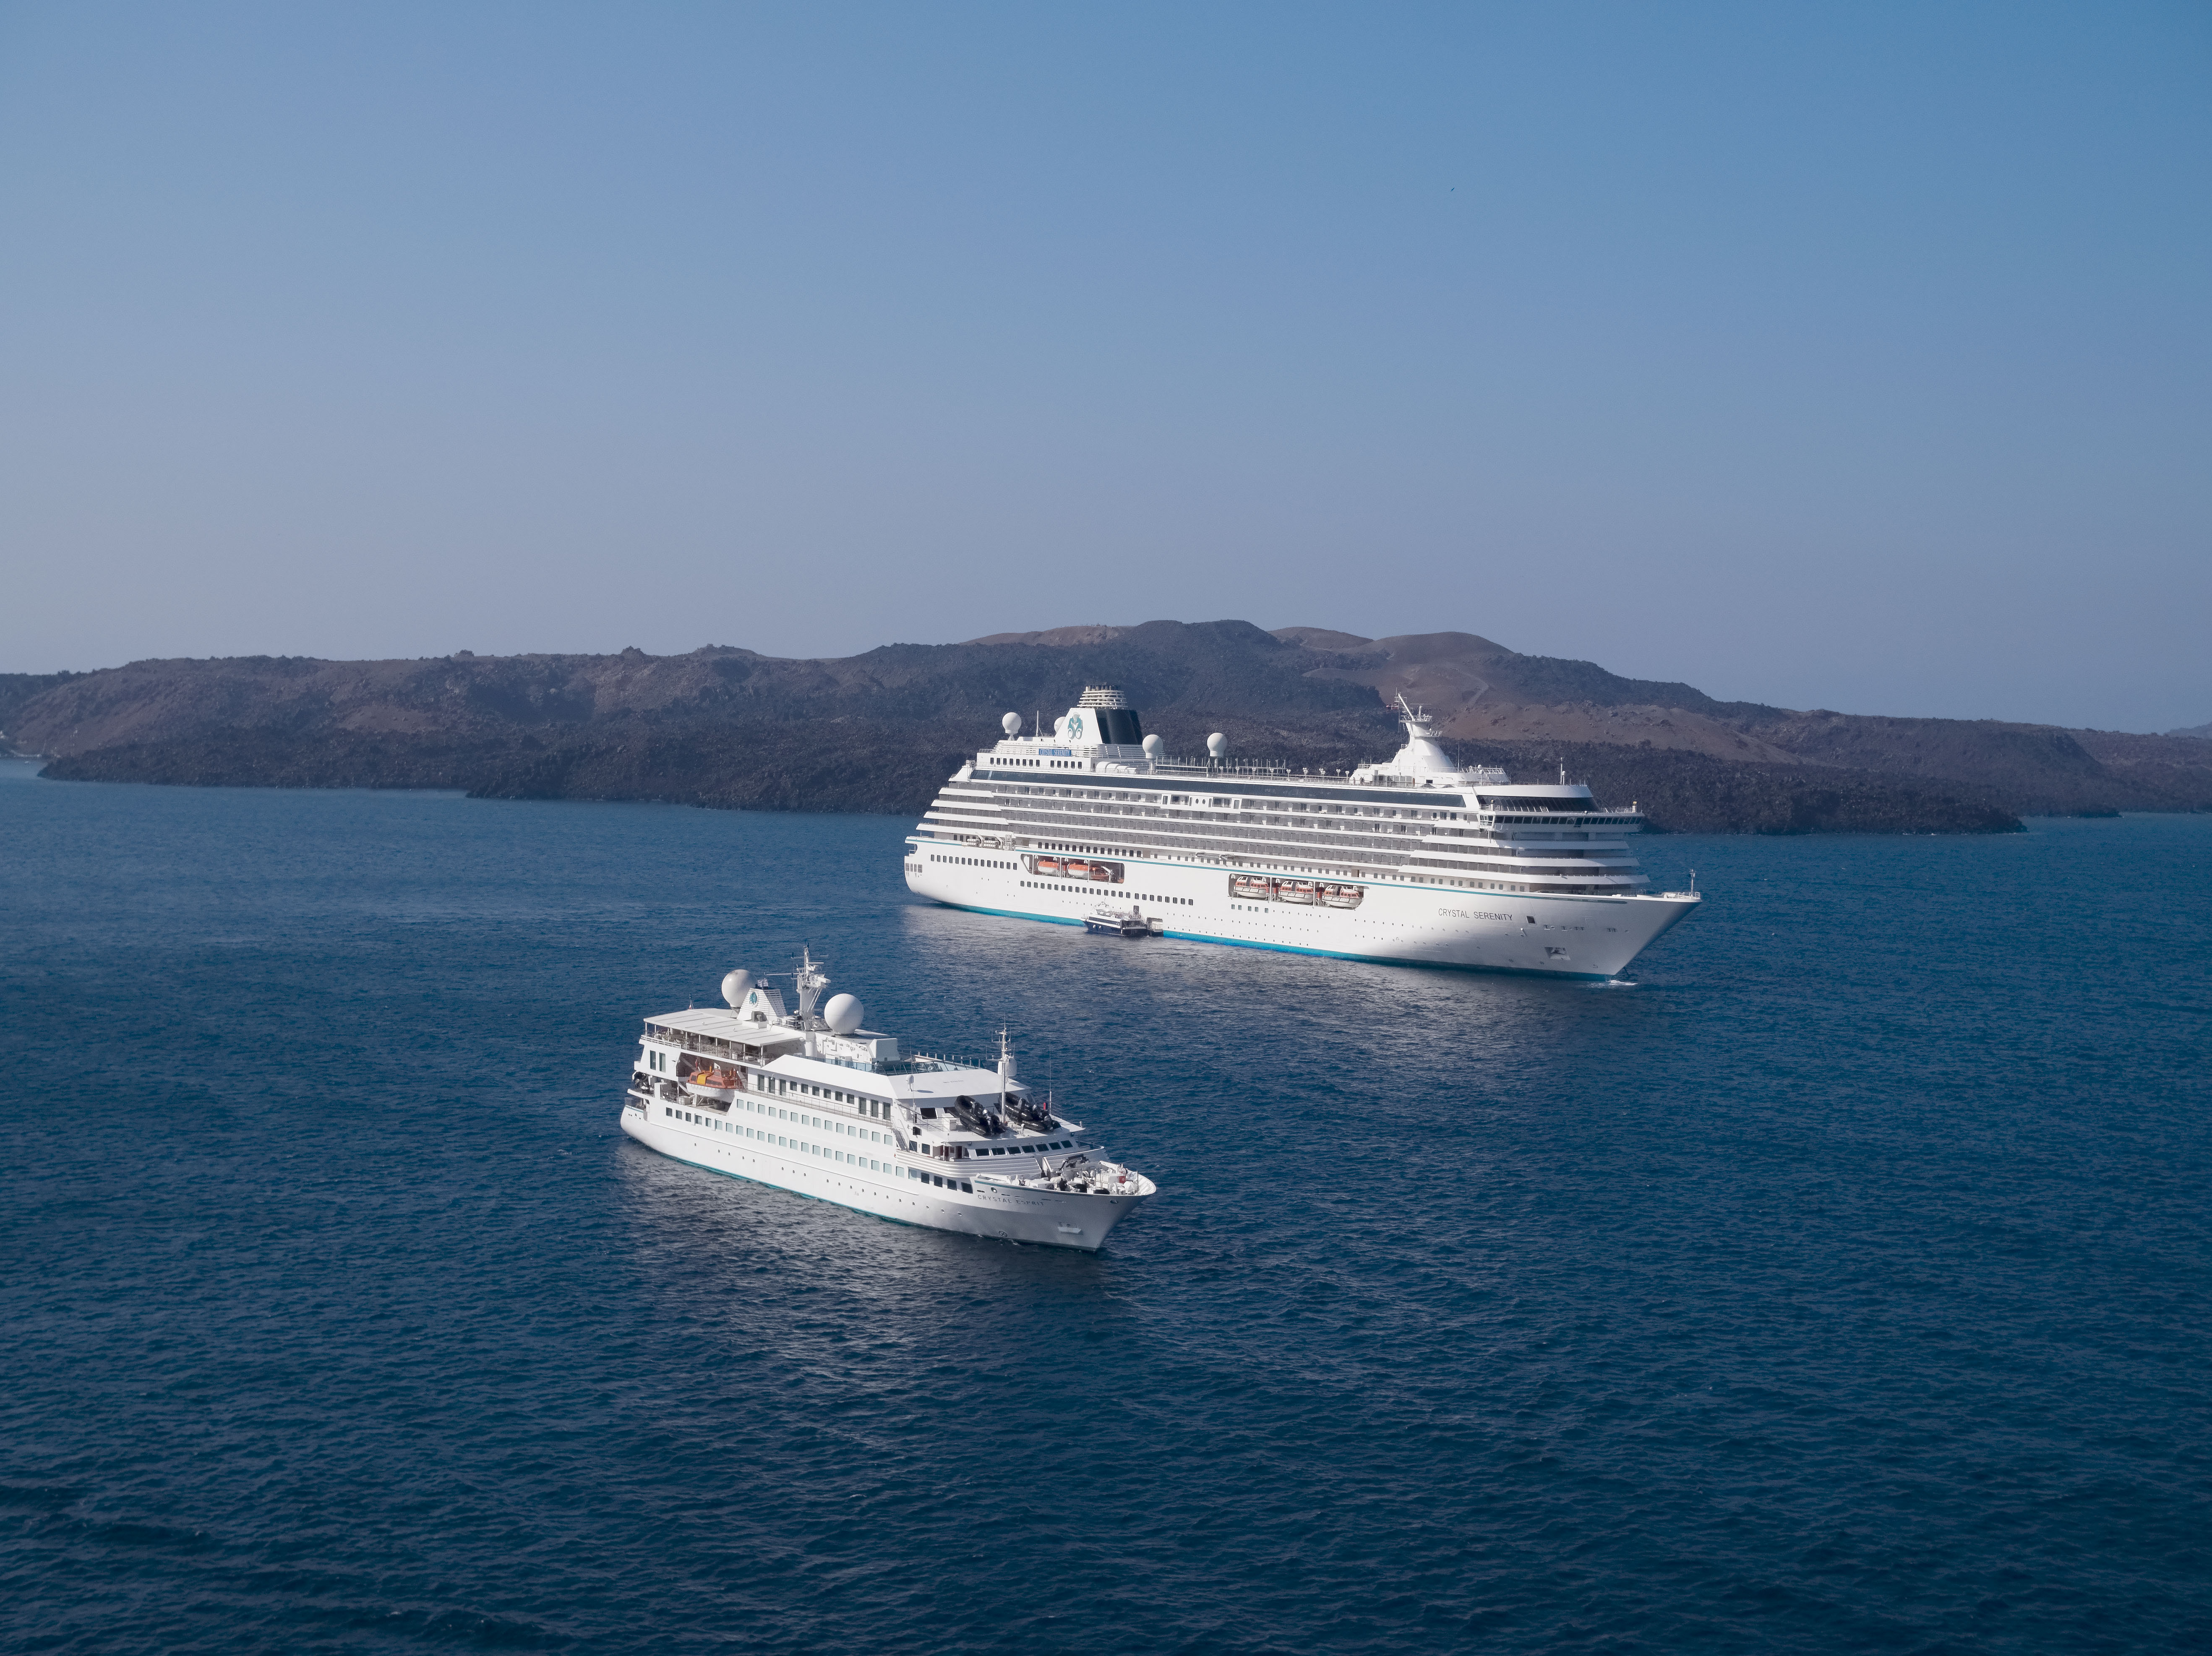 Crystal cruises two ships